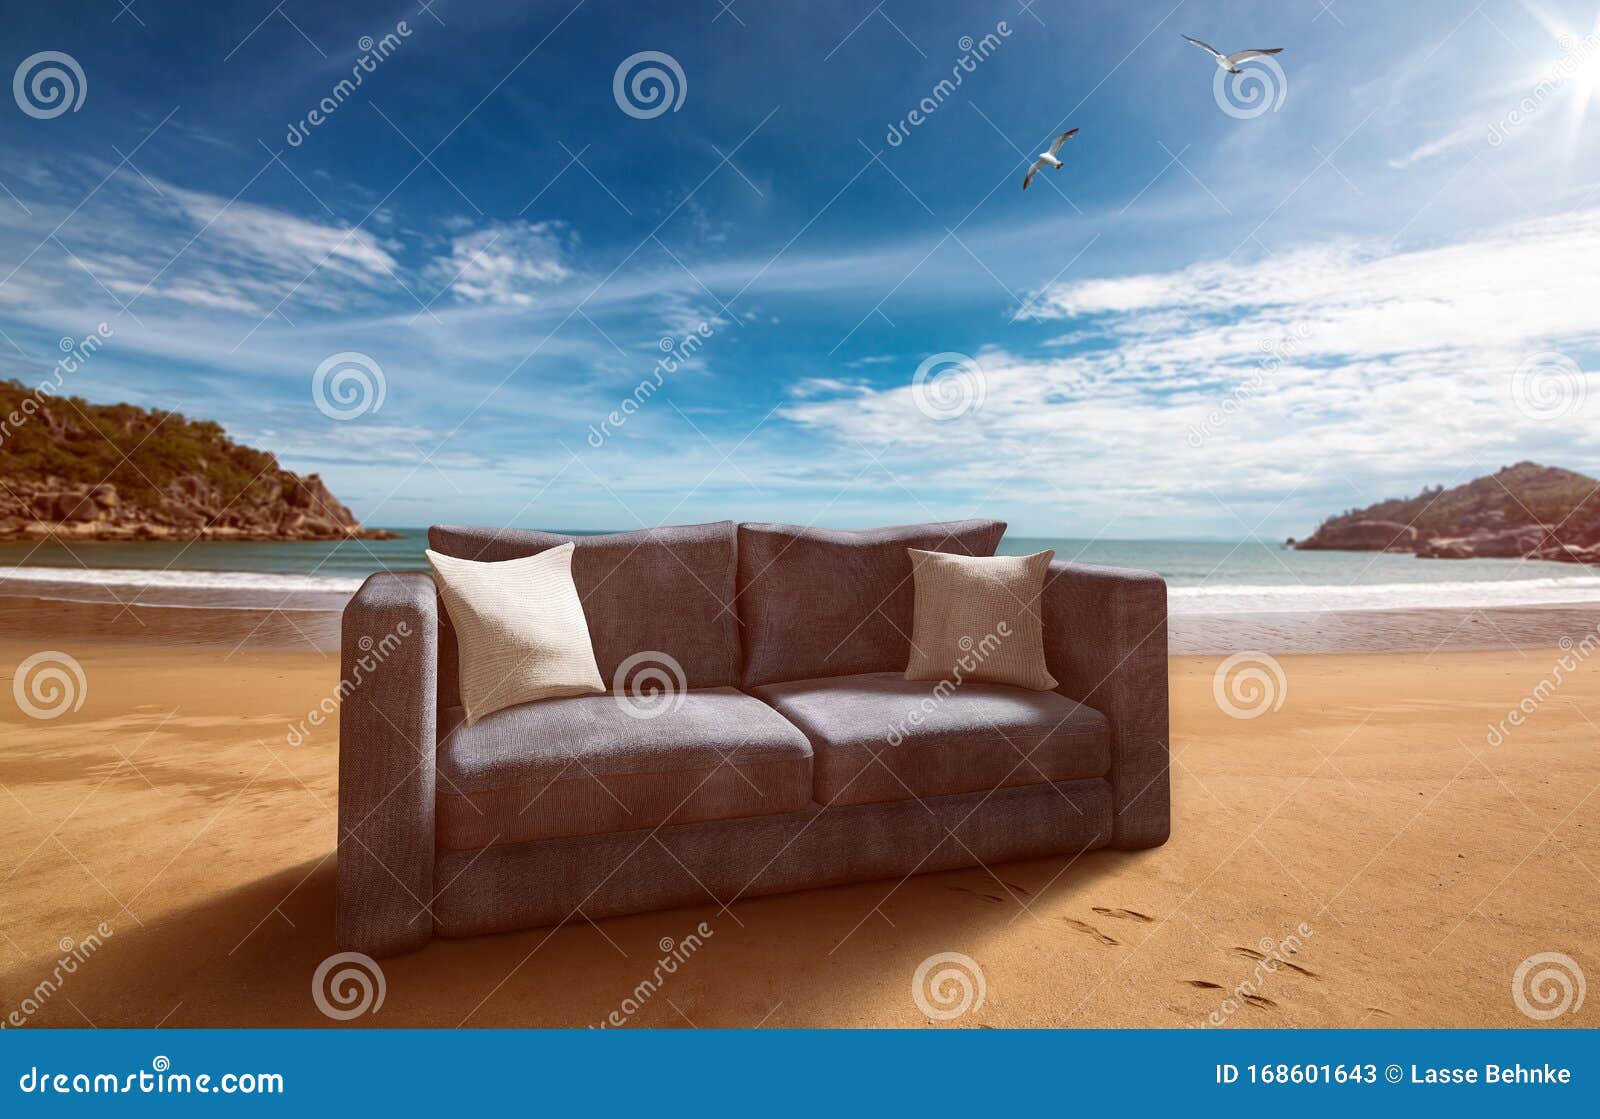 couch at the beach